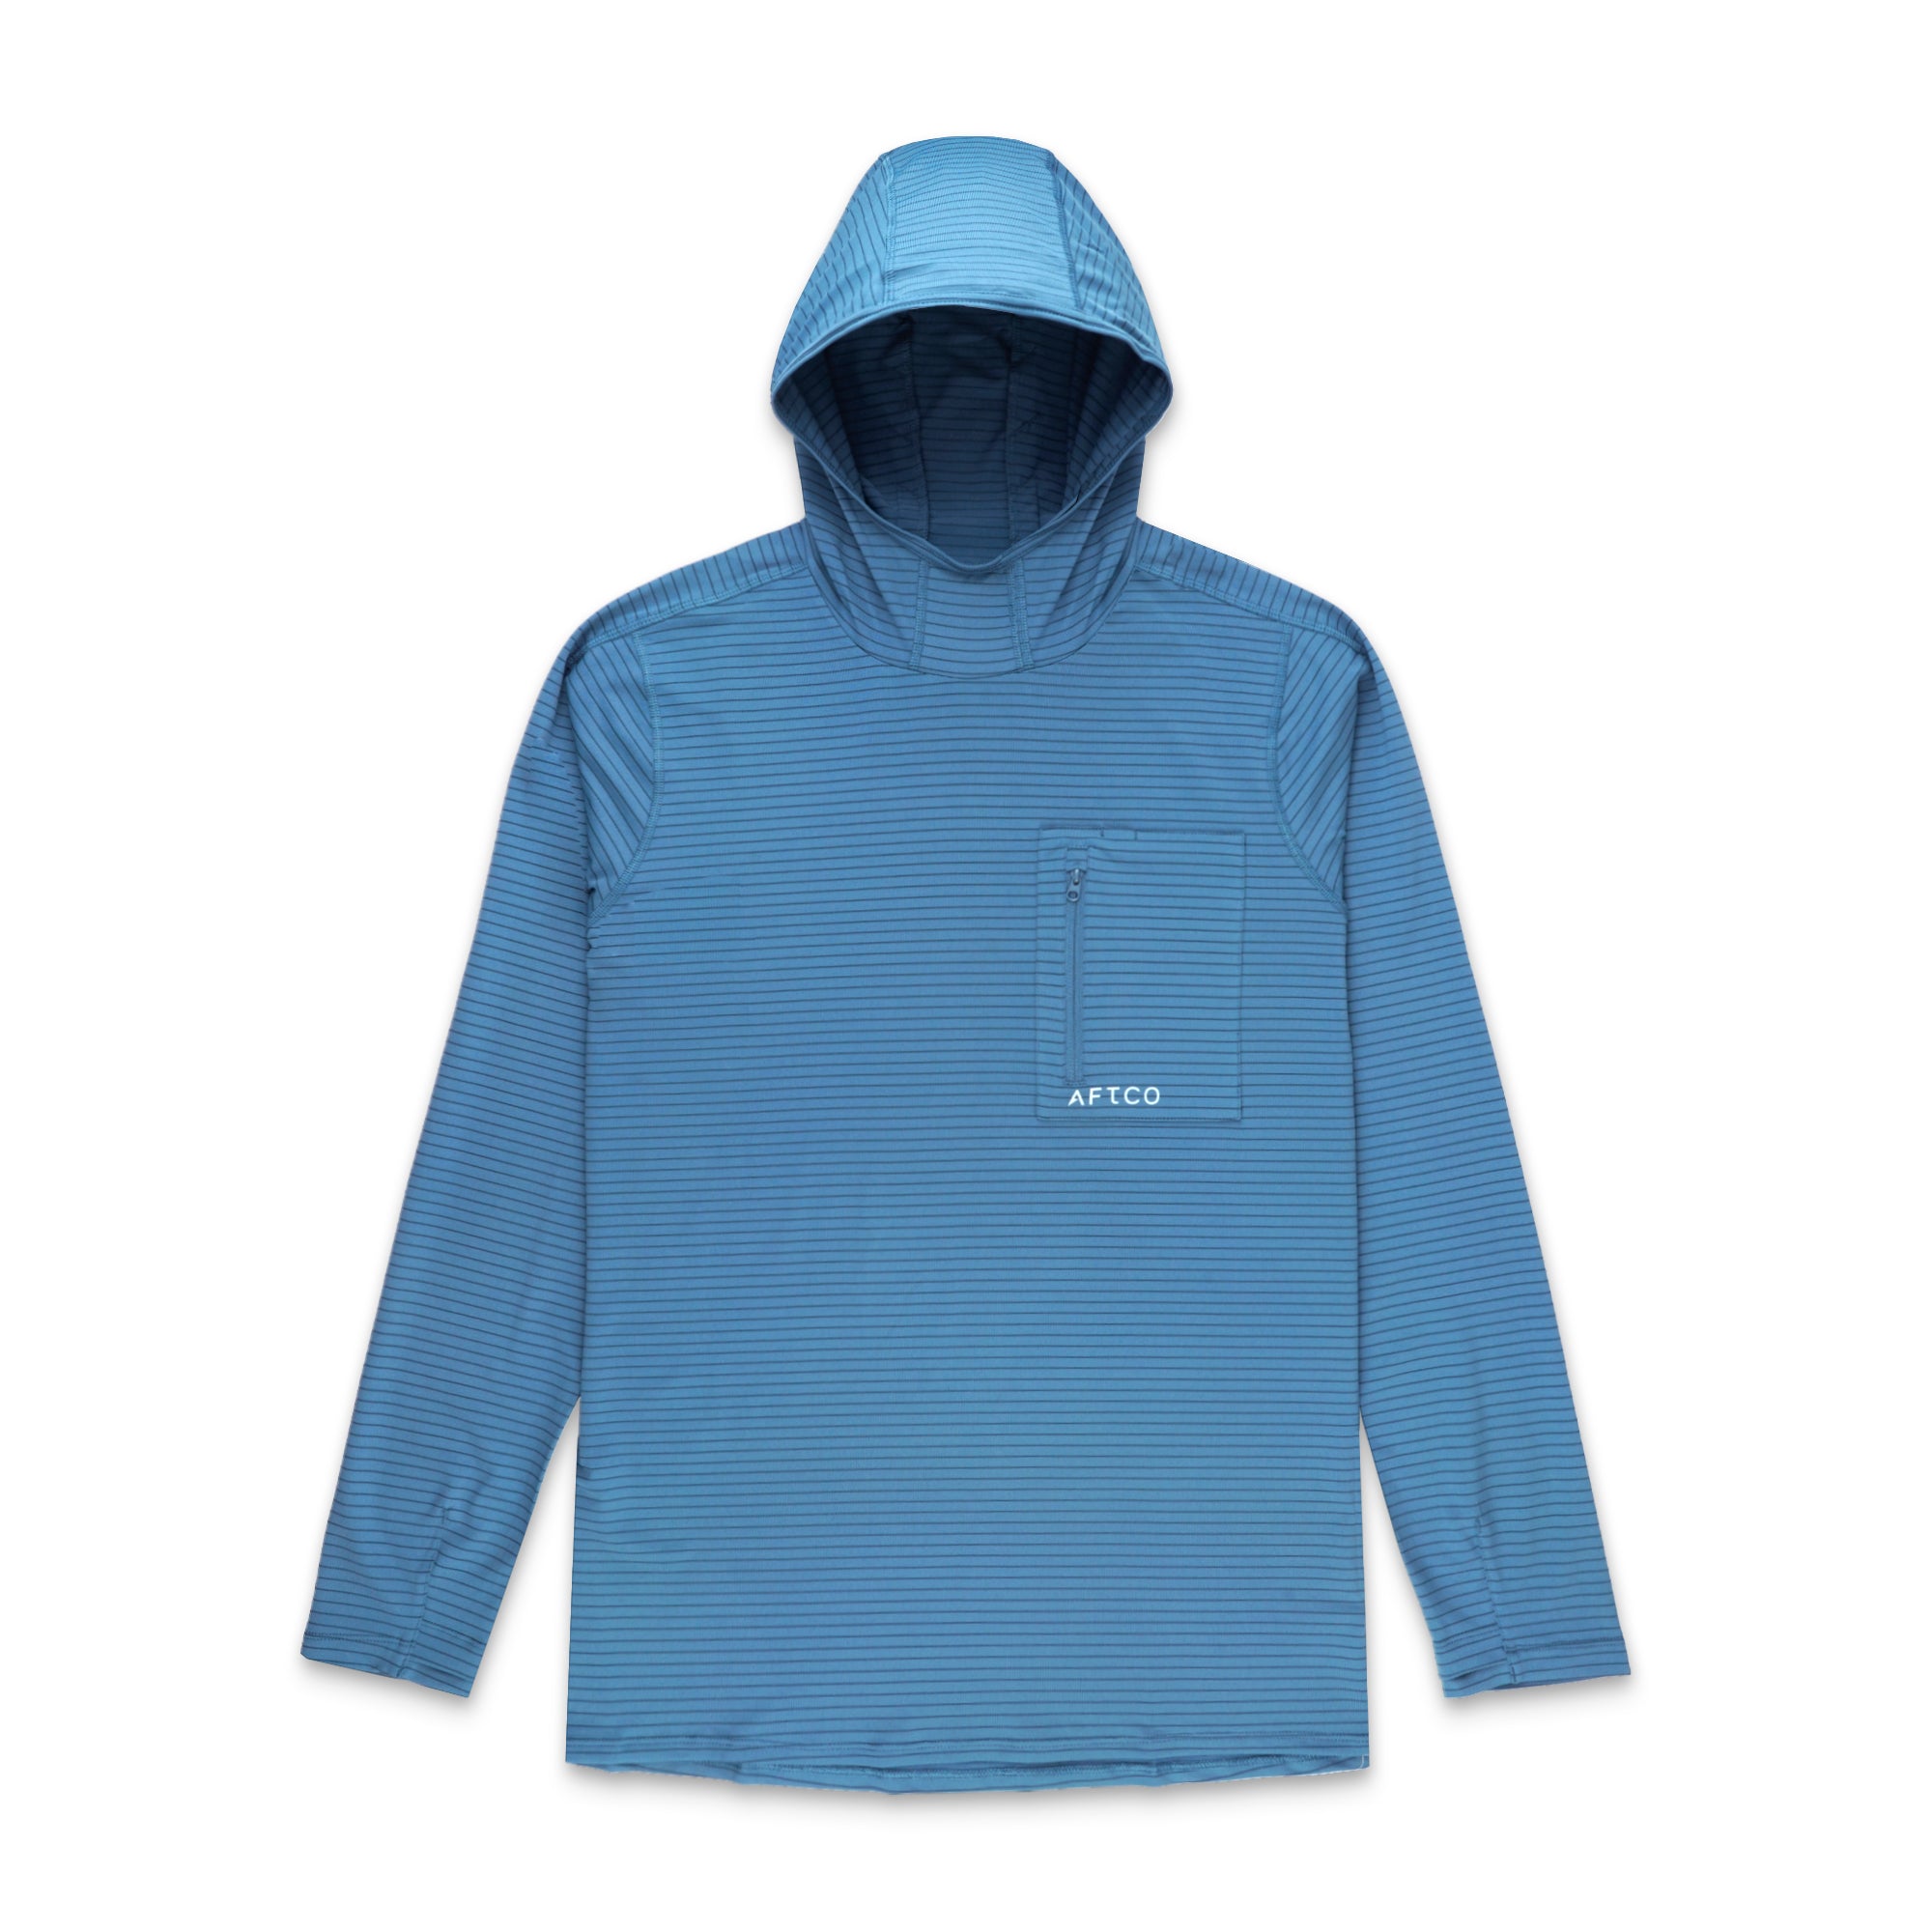 Channel Hooded Performance Shirt -